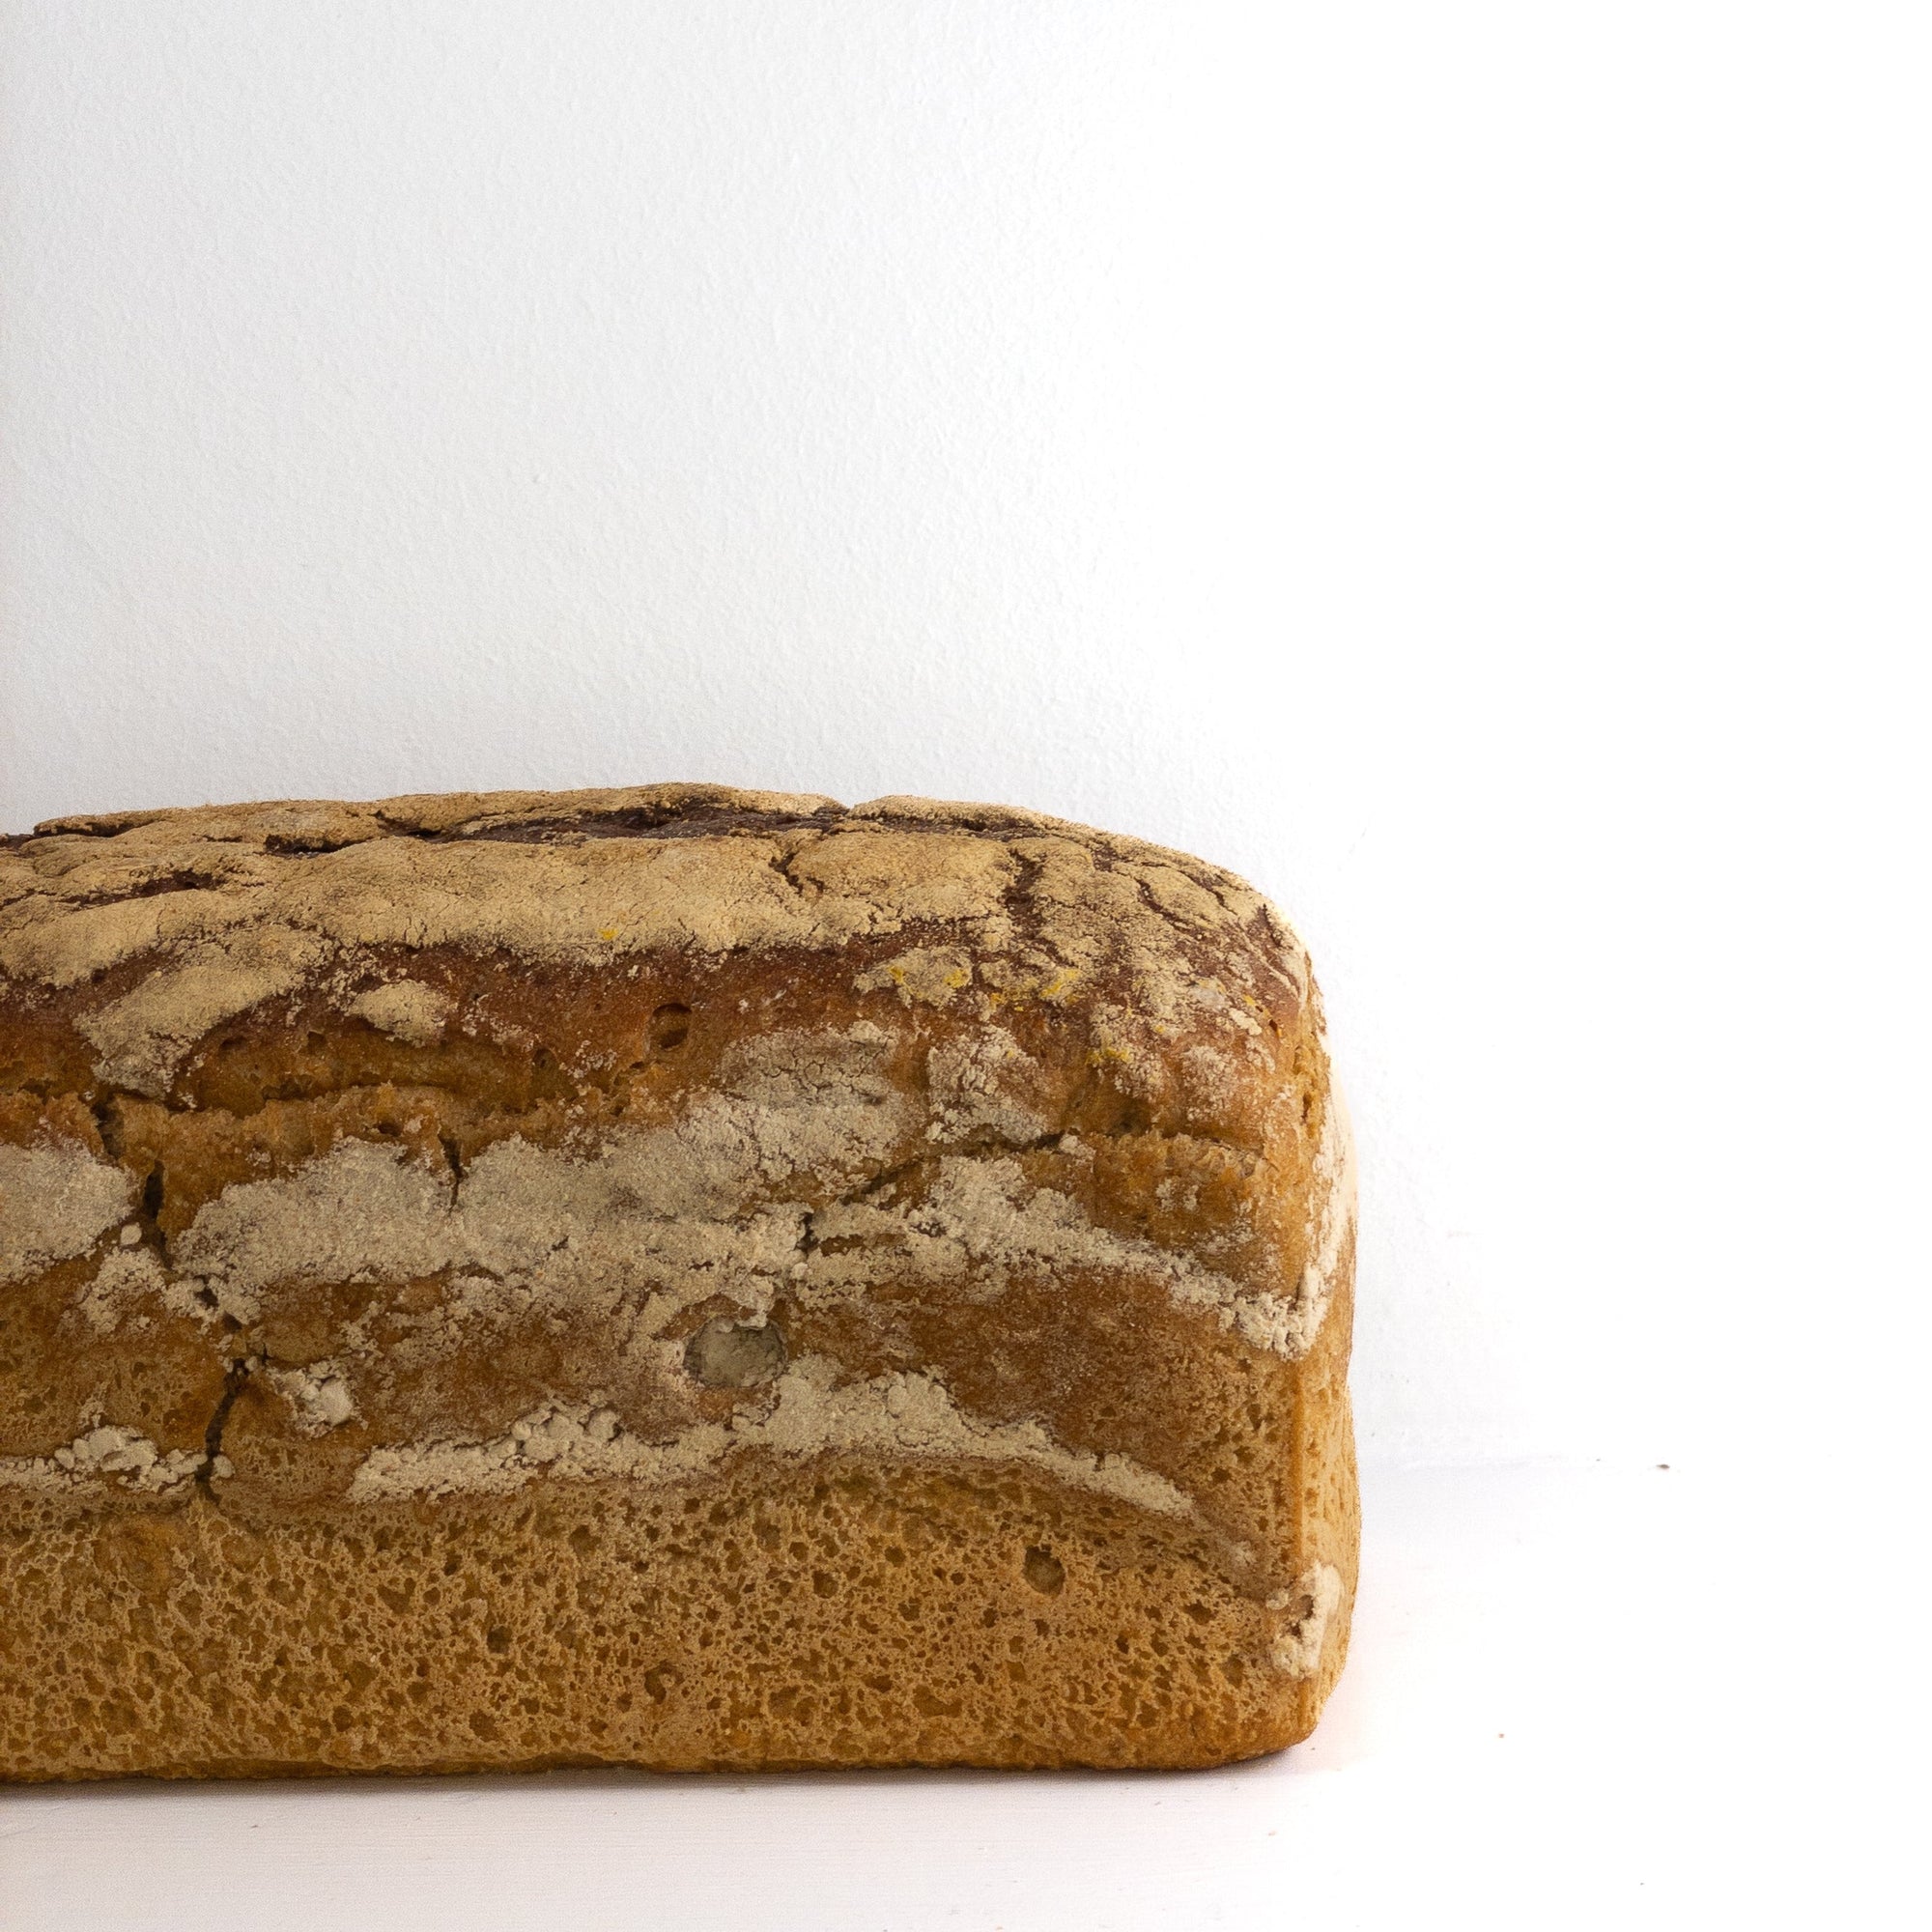 close up image of the brown rye loaf